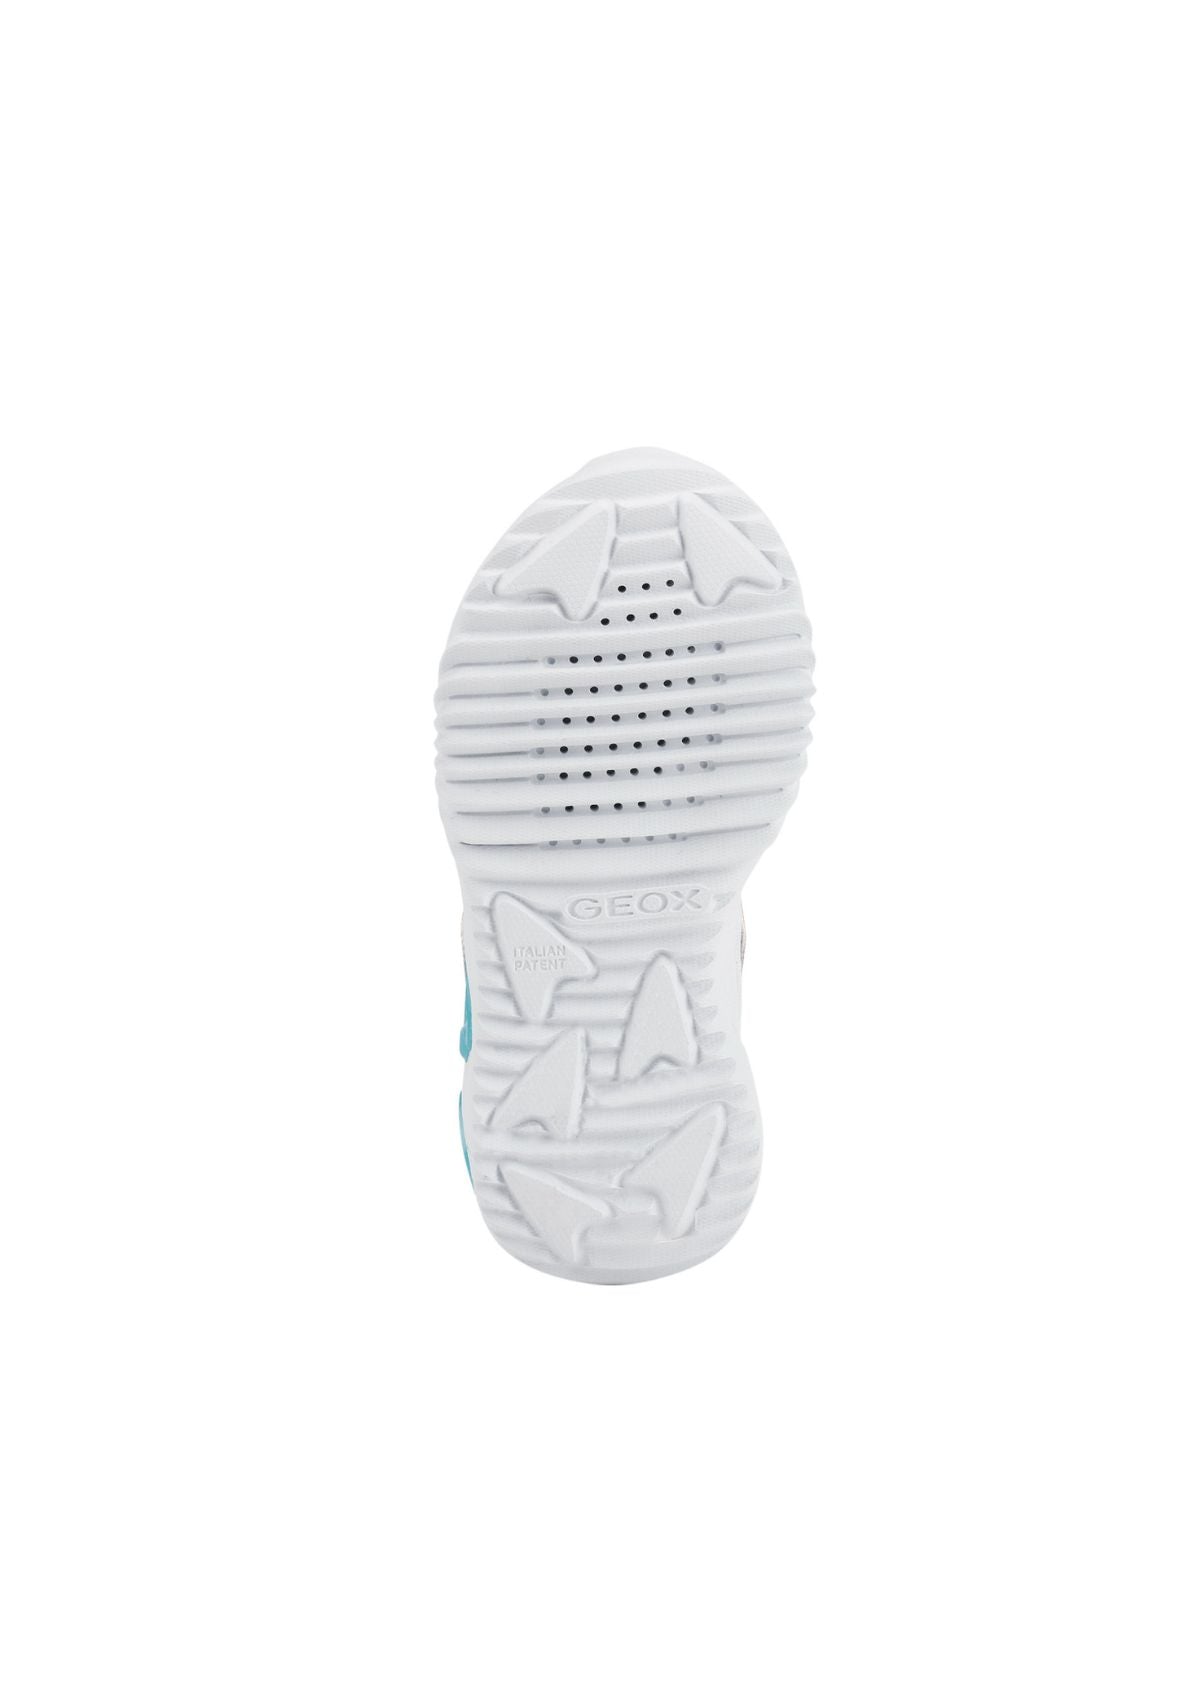 Geox Junior Girls ASSISTER Silver Lilac sole